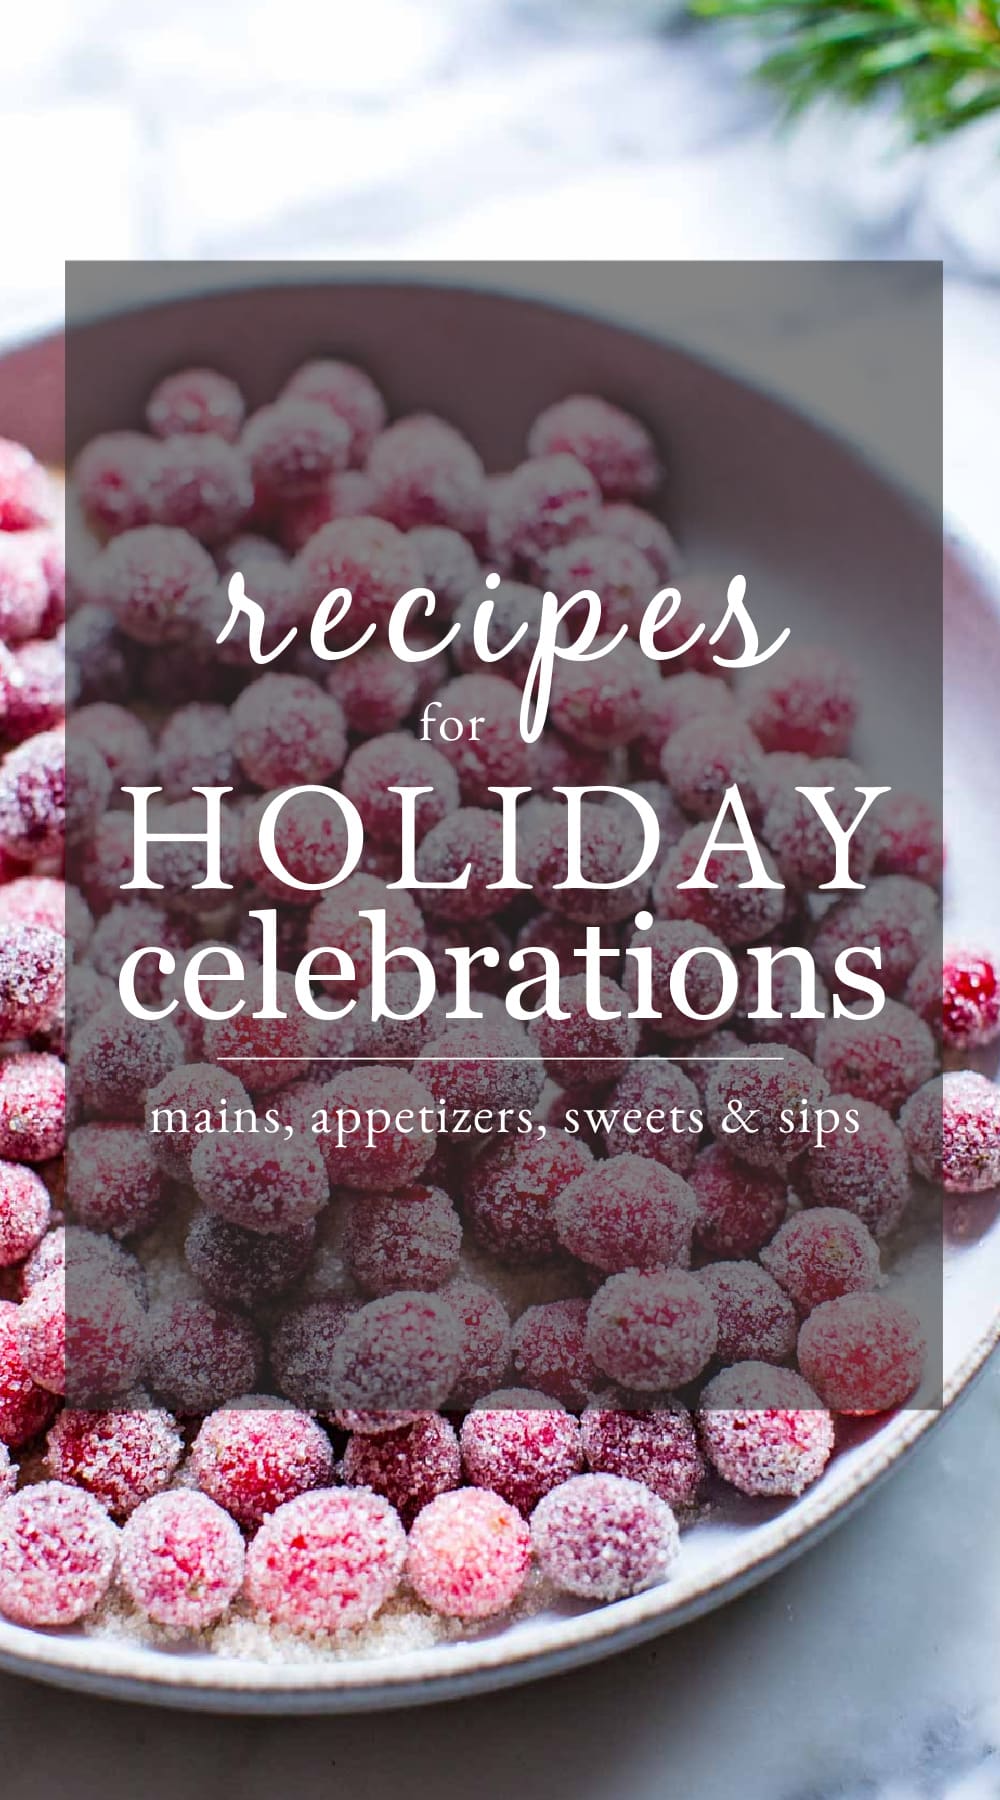 Recipes for holiday celebrations text over a bowl of sugared cranberries.